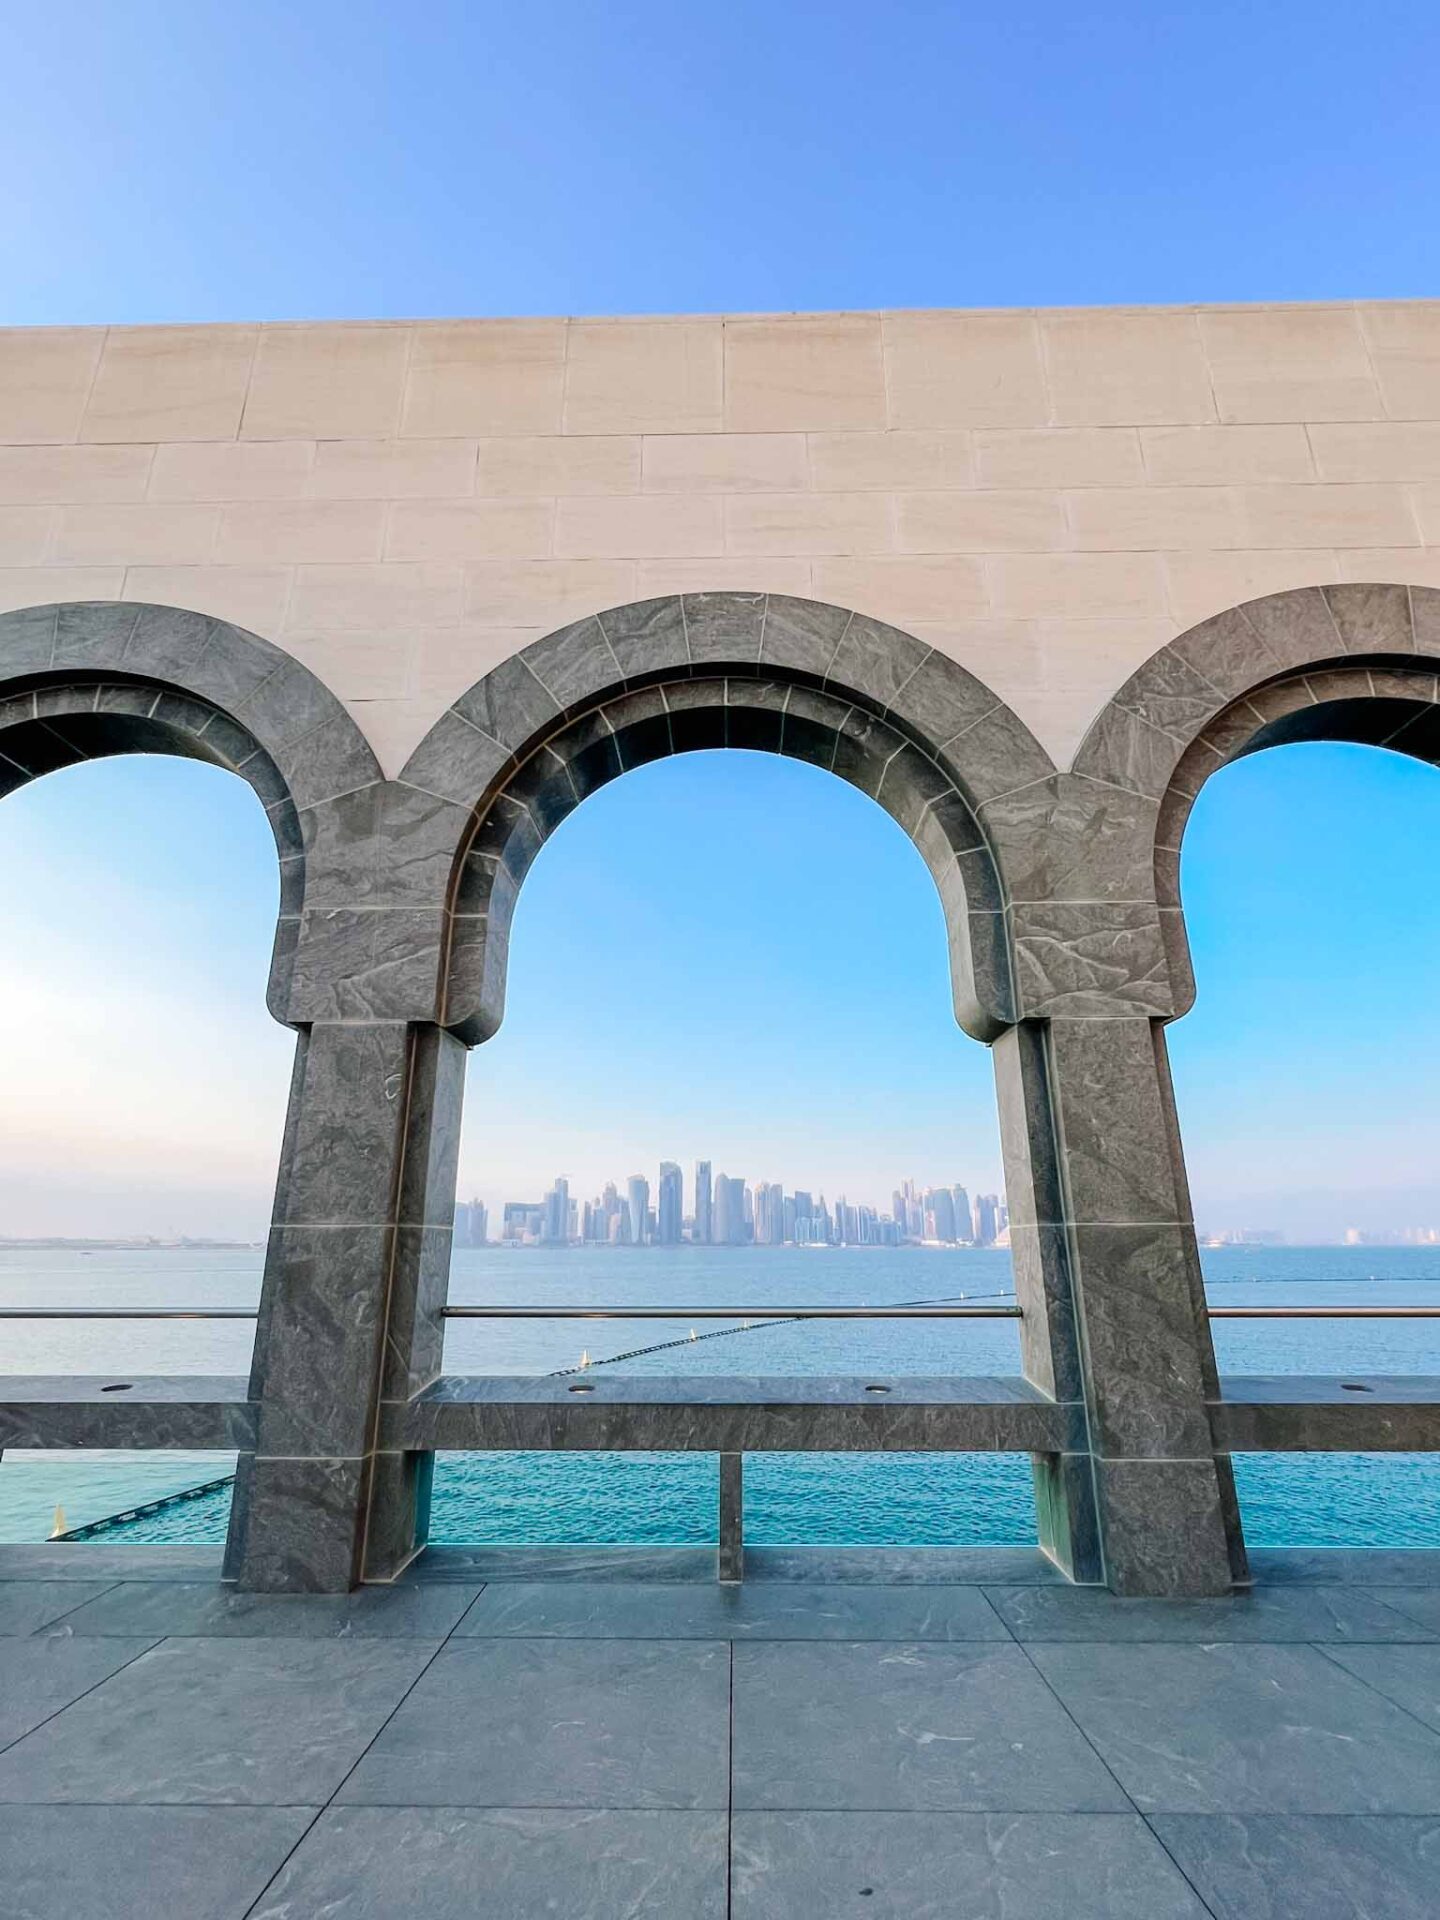 Doha city skyline view from arches in museum of Islamic art, Doha itinerary, Qatar itinerary